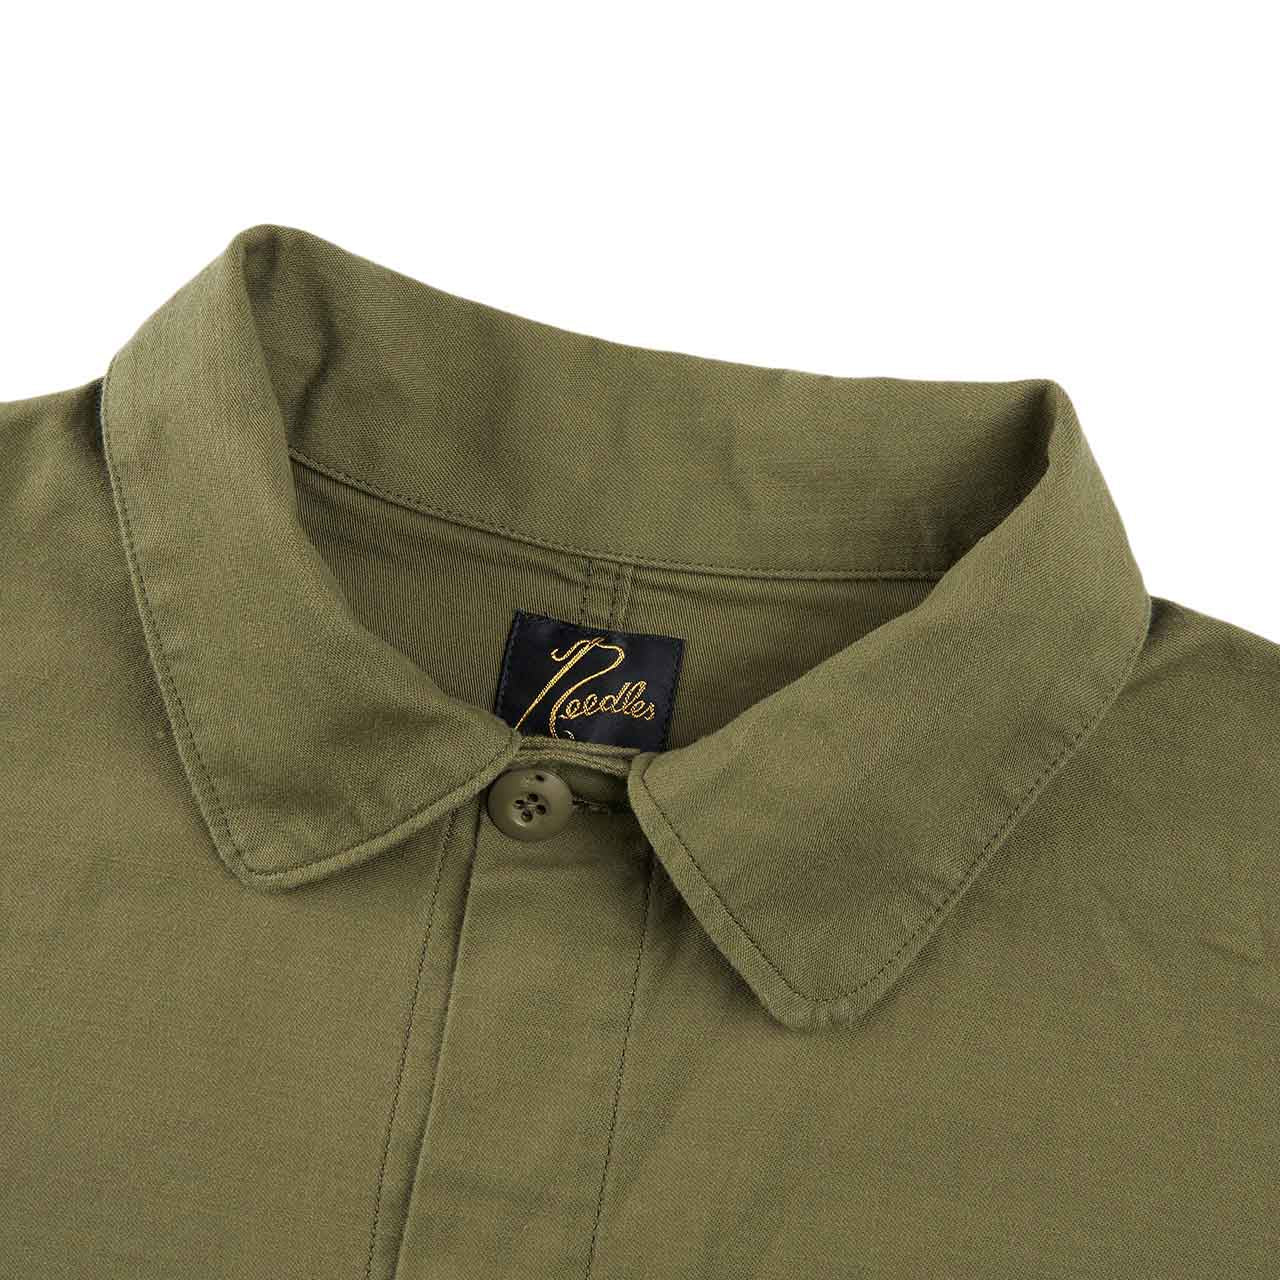 needles d.n. coverall jacket (olive) | a.plus